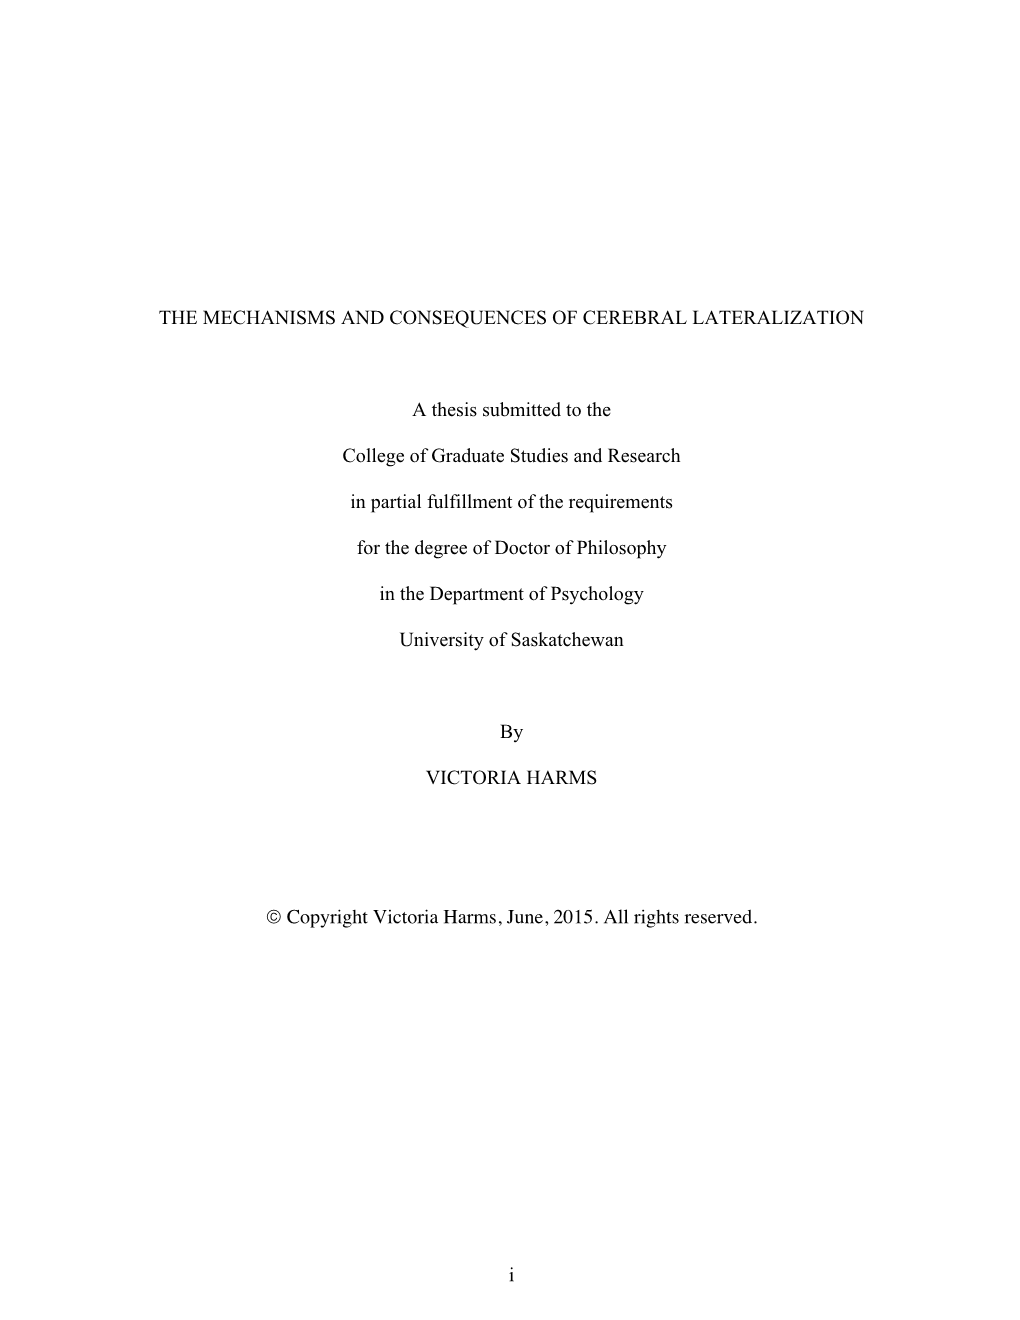 I the MECHANISMS and CONSEQUENCES of CEREBRAL LATERALIZATION a Thesis Submitted to the College of Graduate Studies and Researc